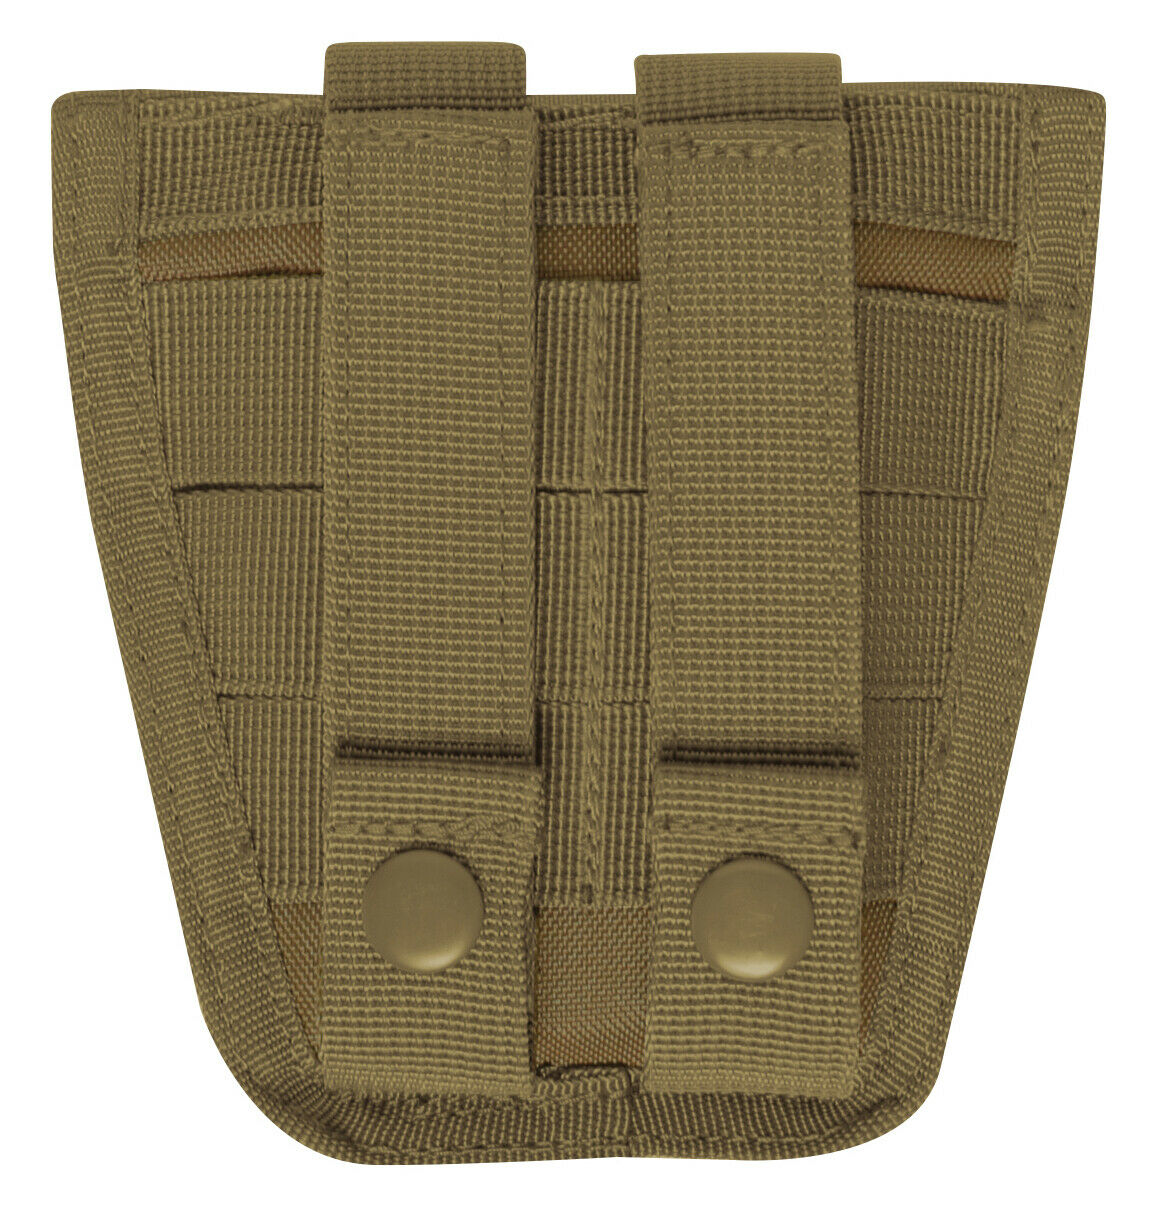 Rothco MOLLE Handcuff Pouch